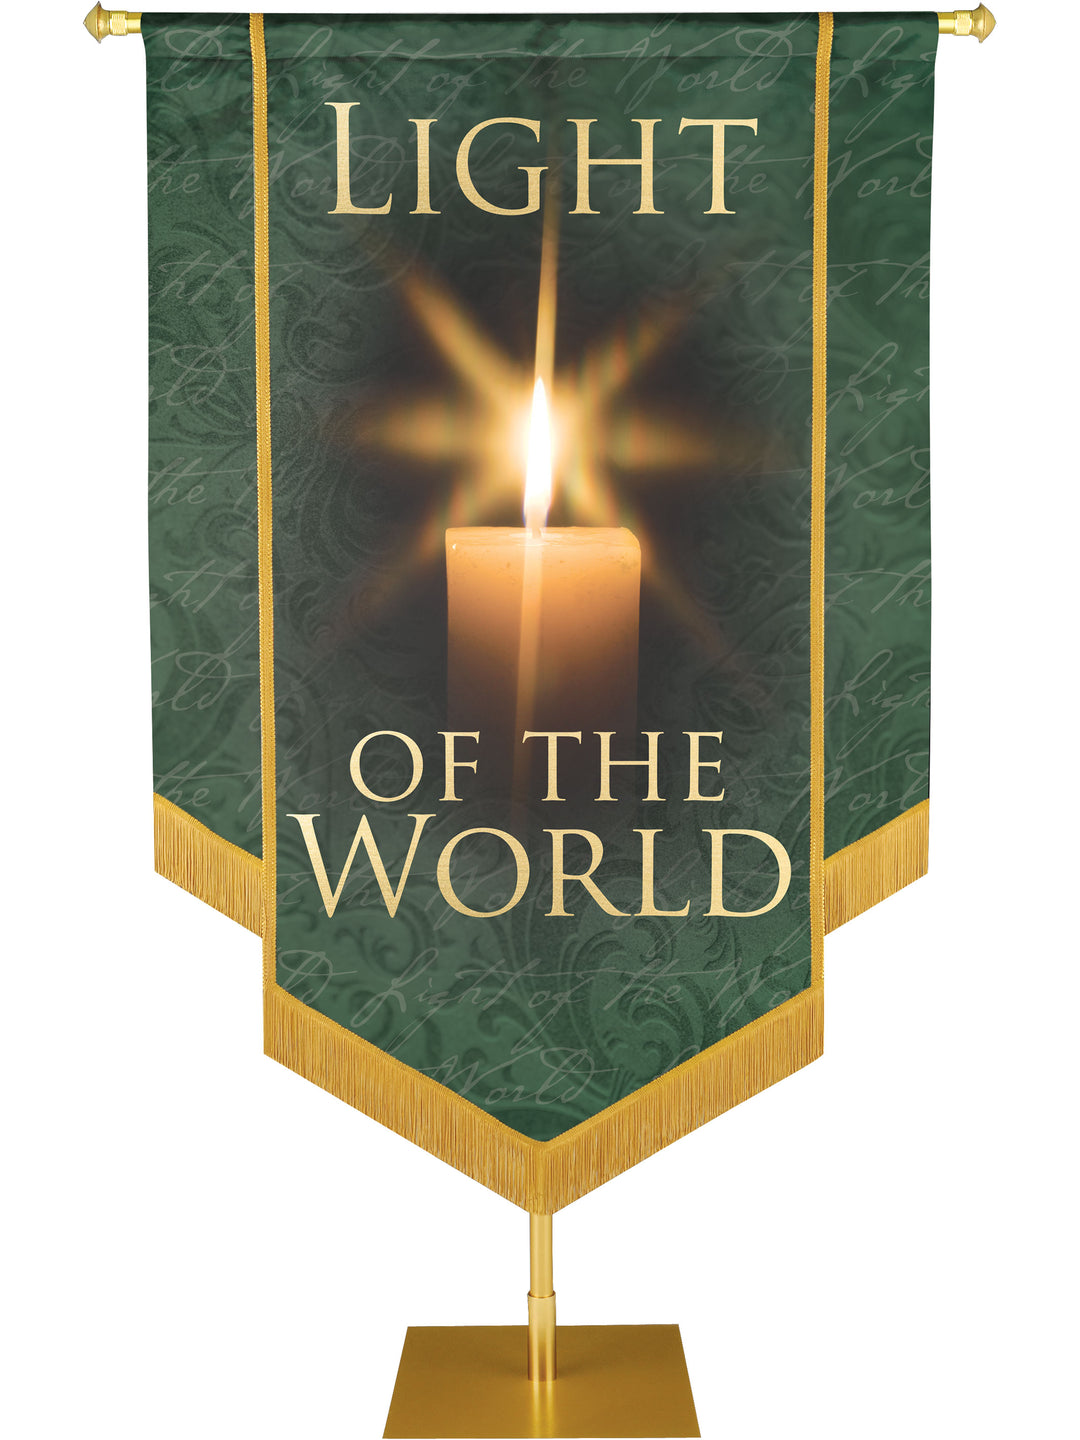 Names of Christ Light of the World Embellished Banner - Handcrafted Banners - PraiseBanners